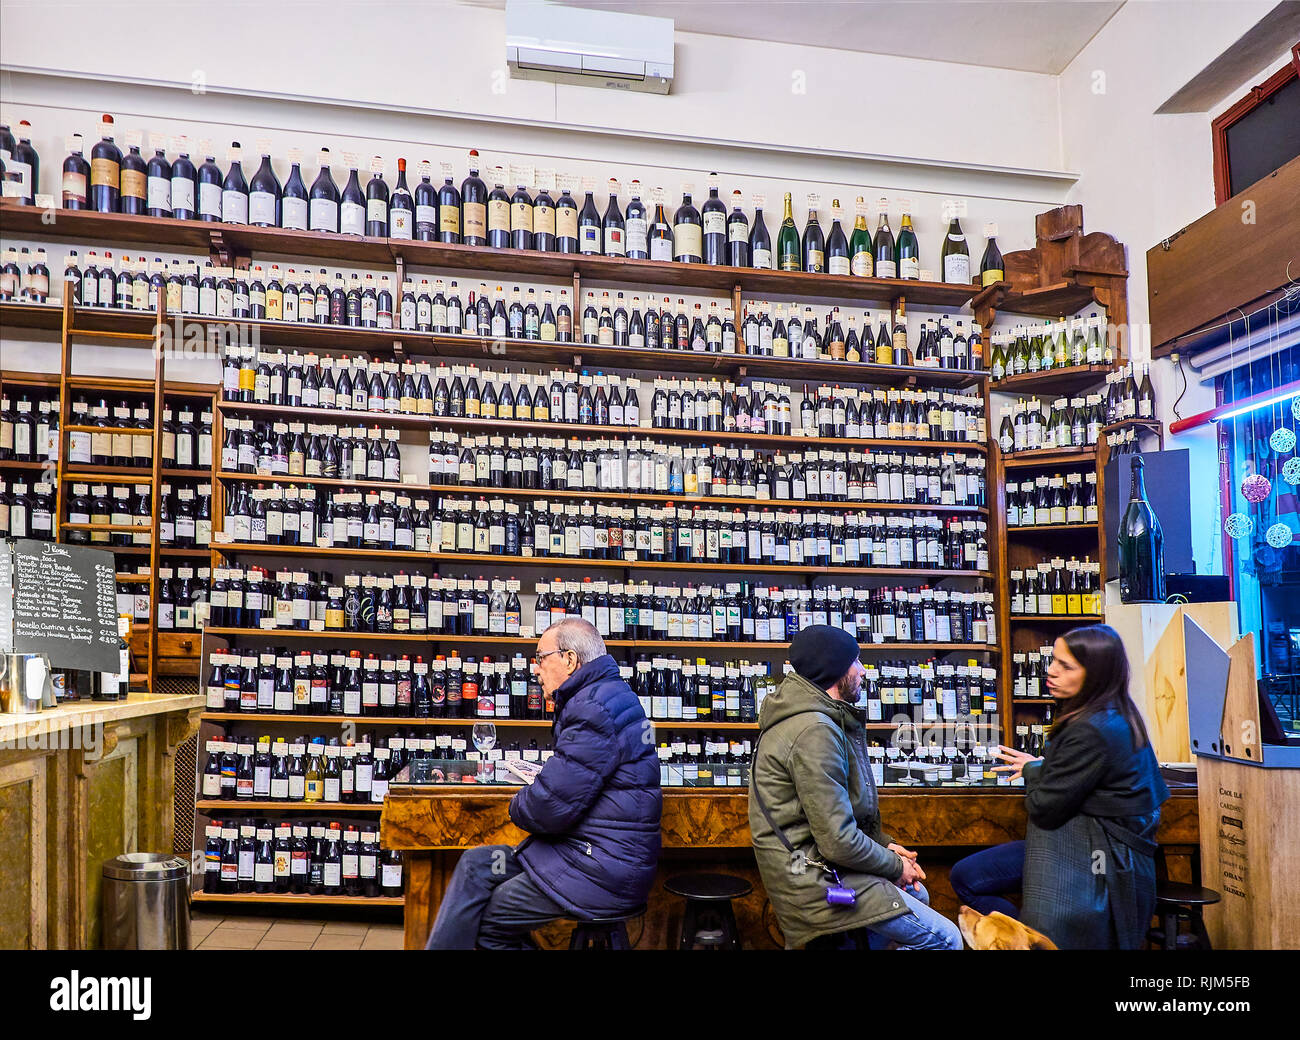 Turin, Italy - December 31, 2018. Costumers in front of a wine bottles wall of an Italian Wine Bar. Turin, Piedmont, Italy. Stock Photo